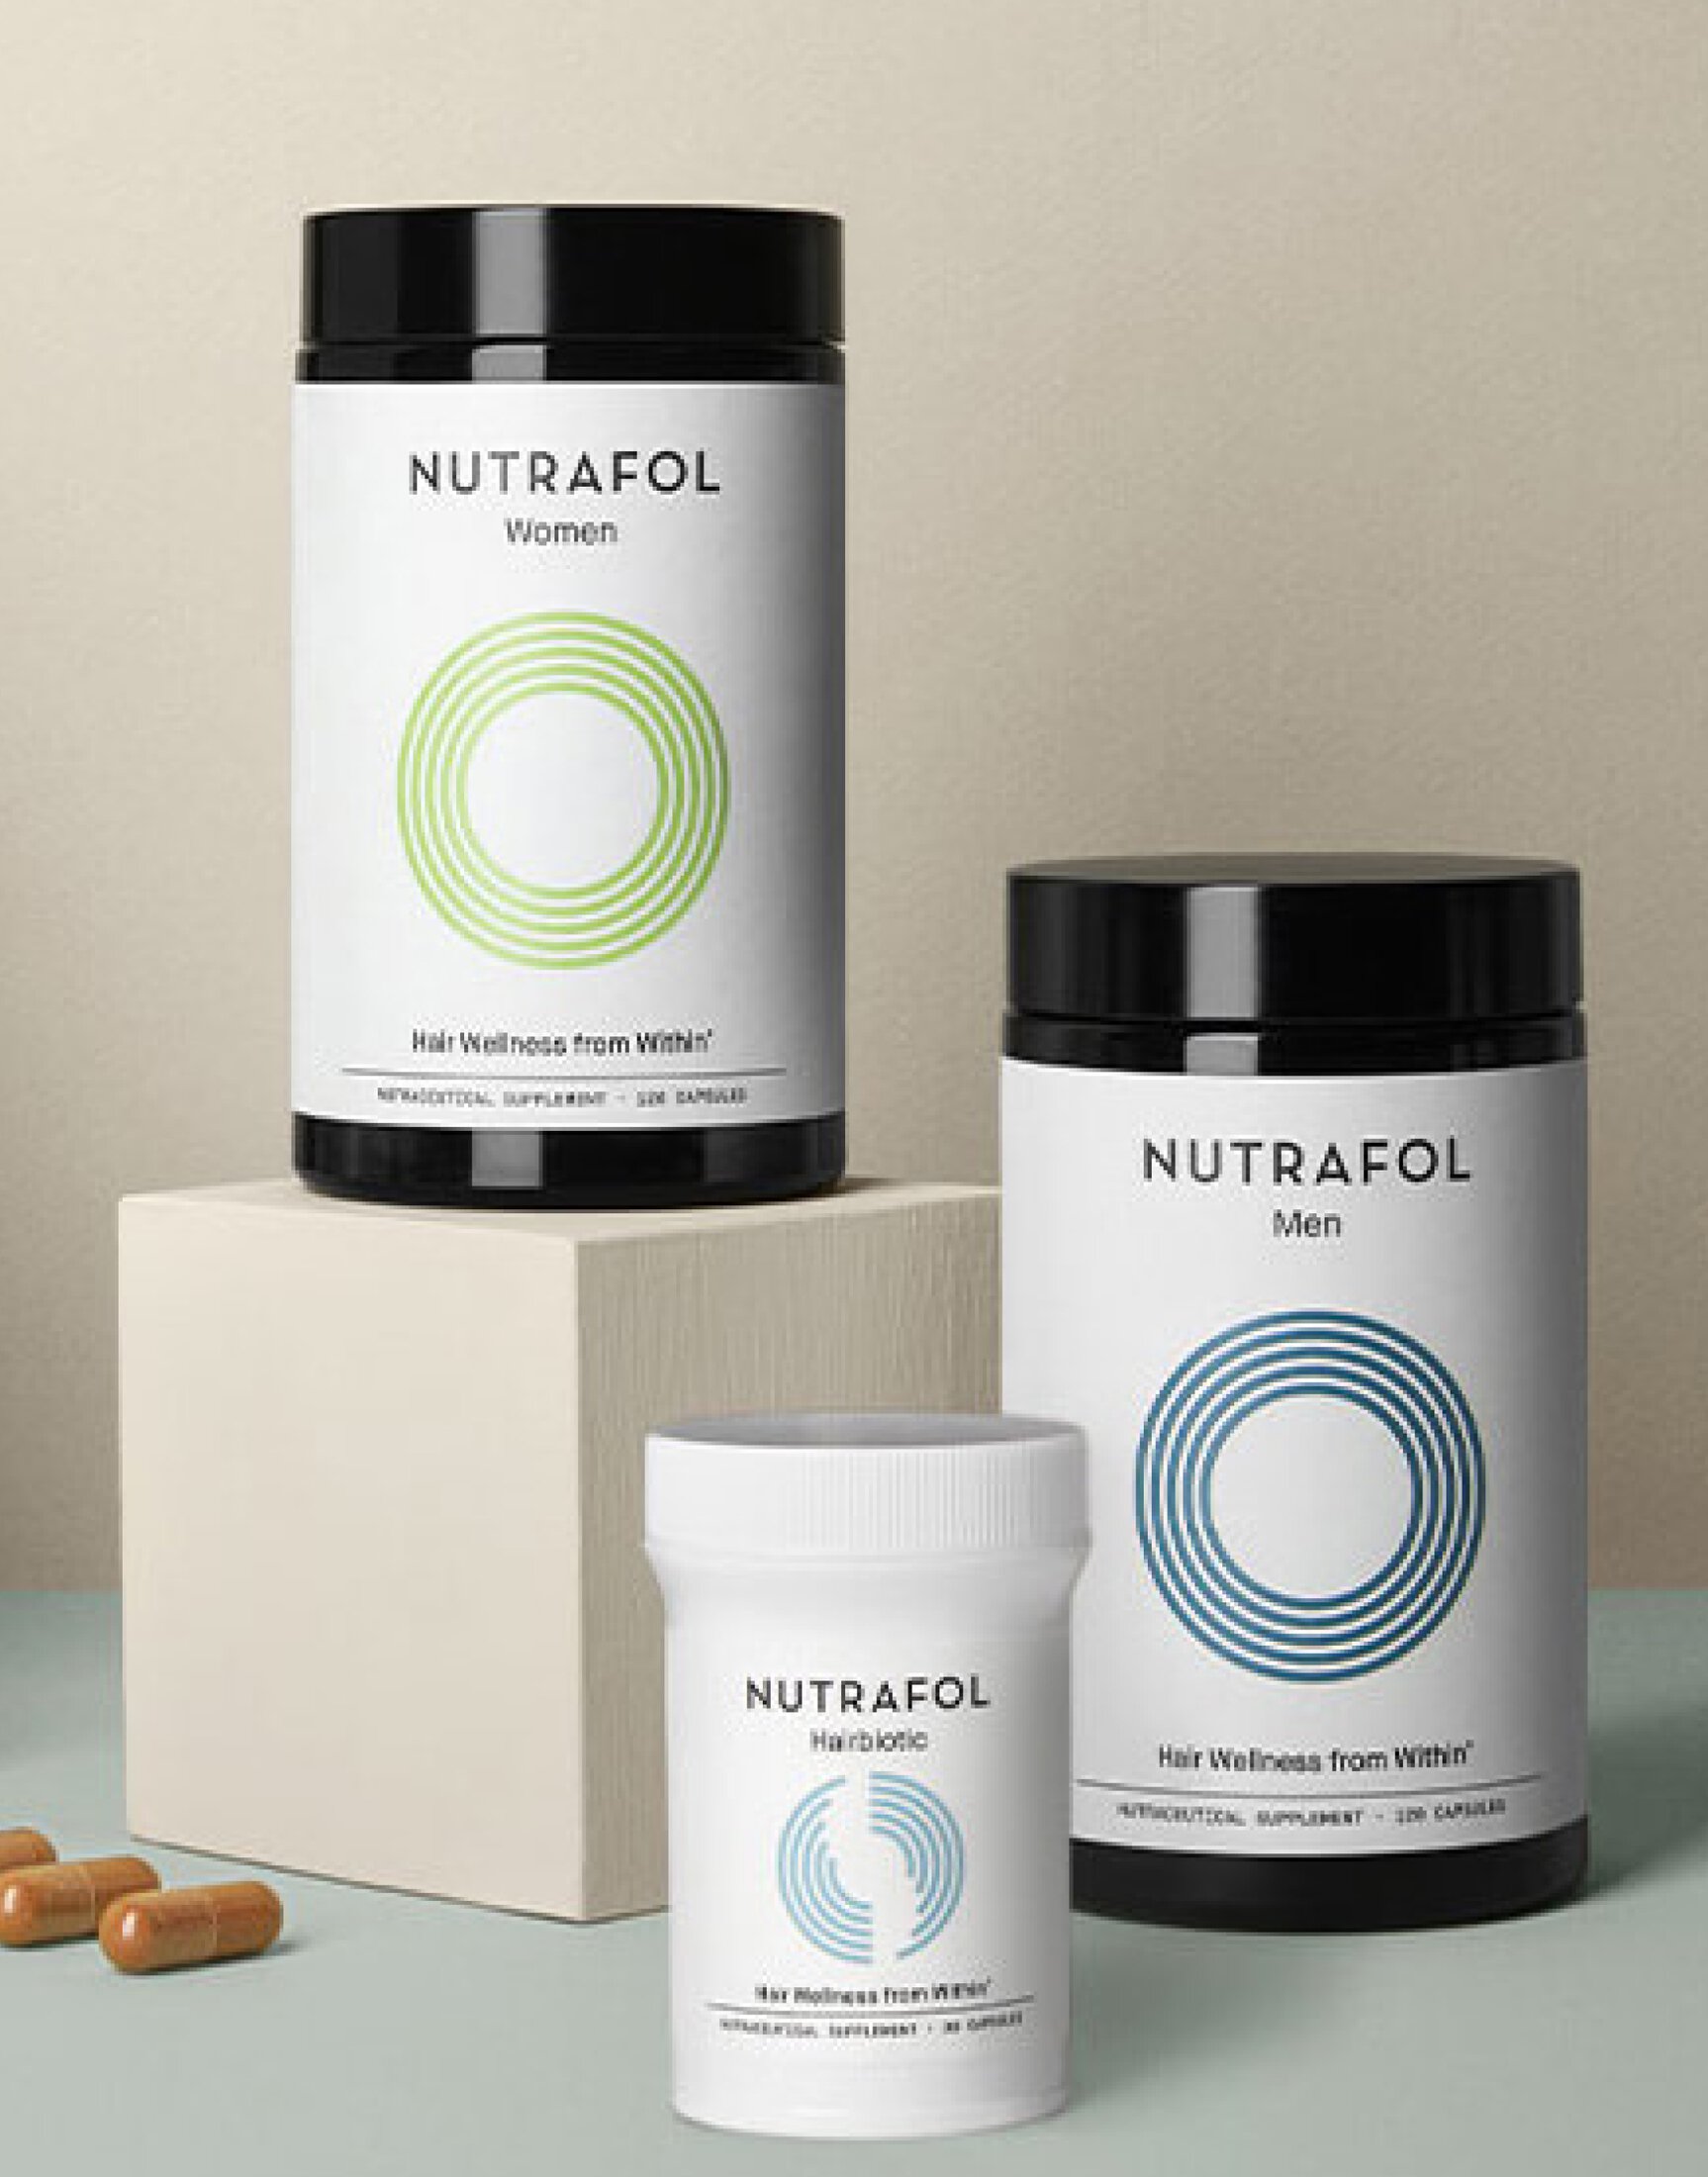 Nutrafol hair and skincare products